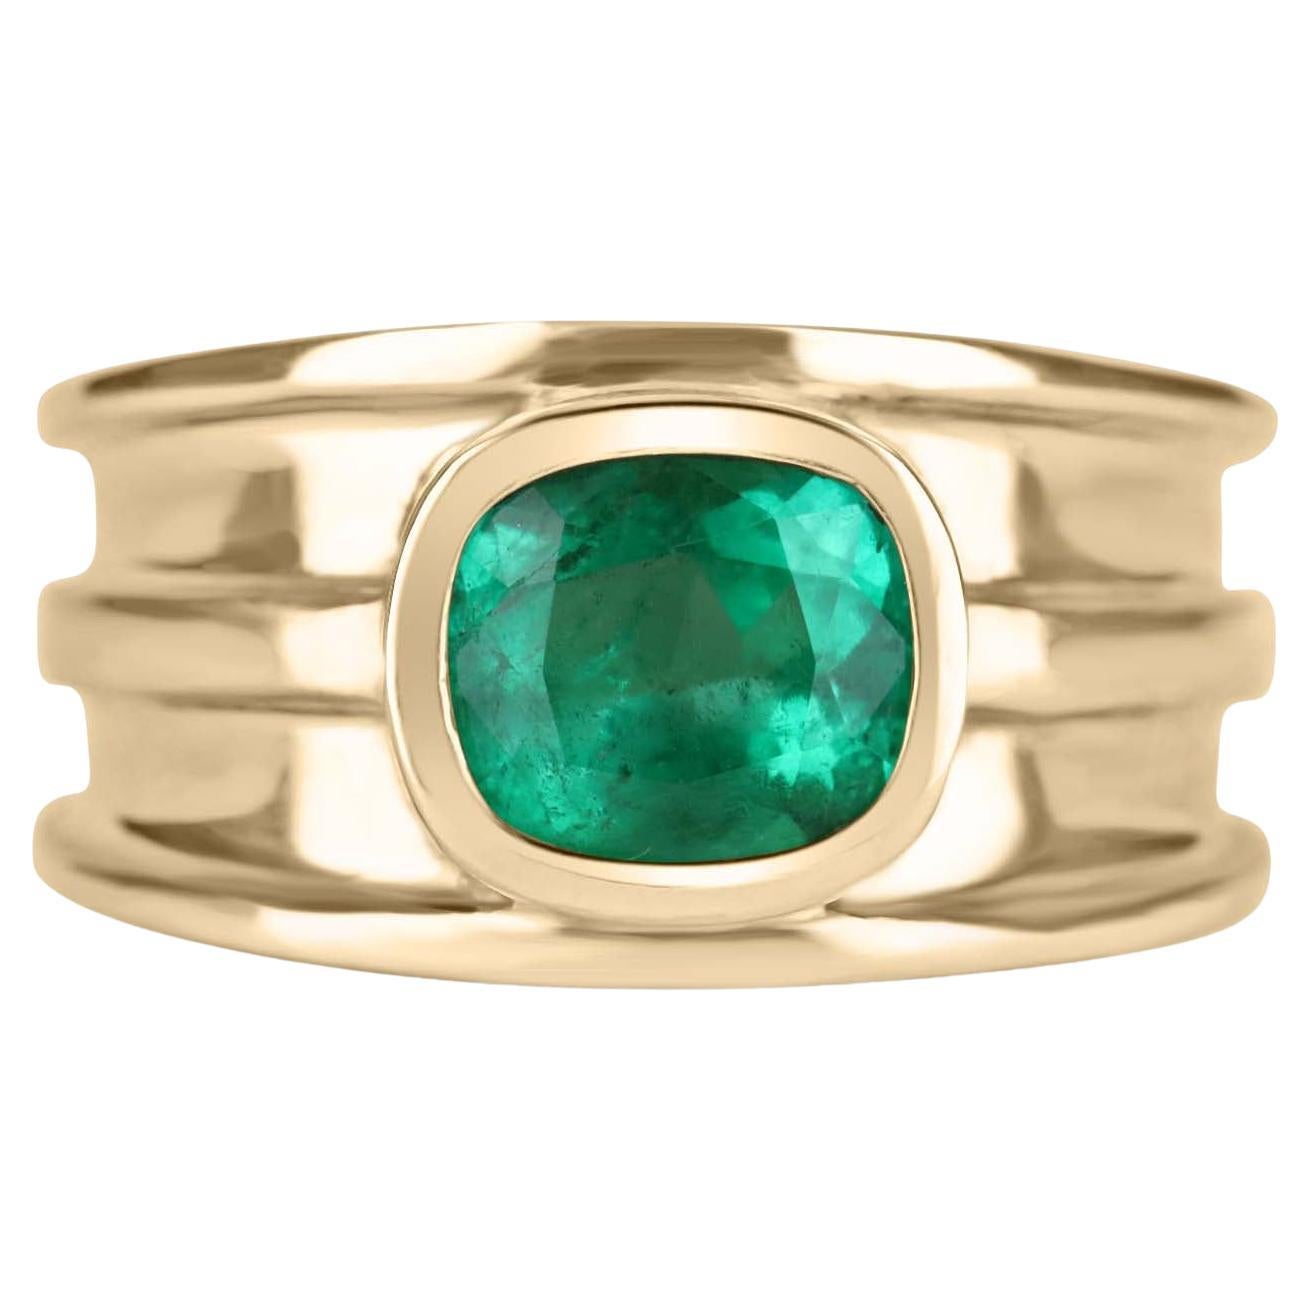 2.05ct 18K Colombian Emerald Cushion Cut Men's Solitaire Gold Ring